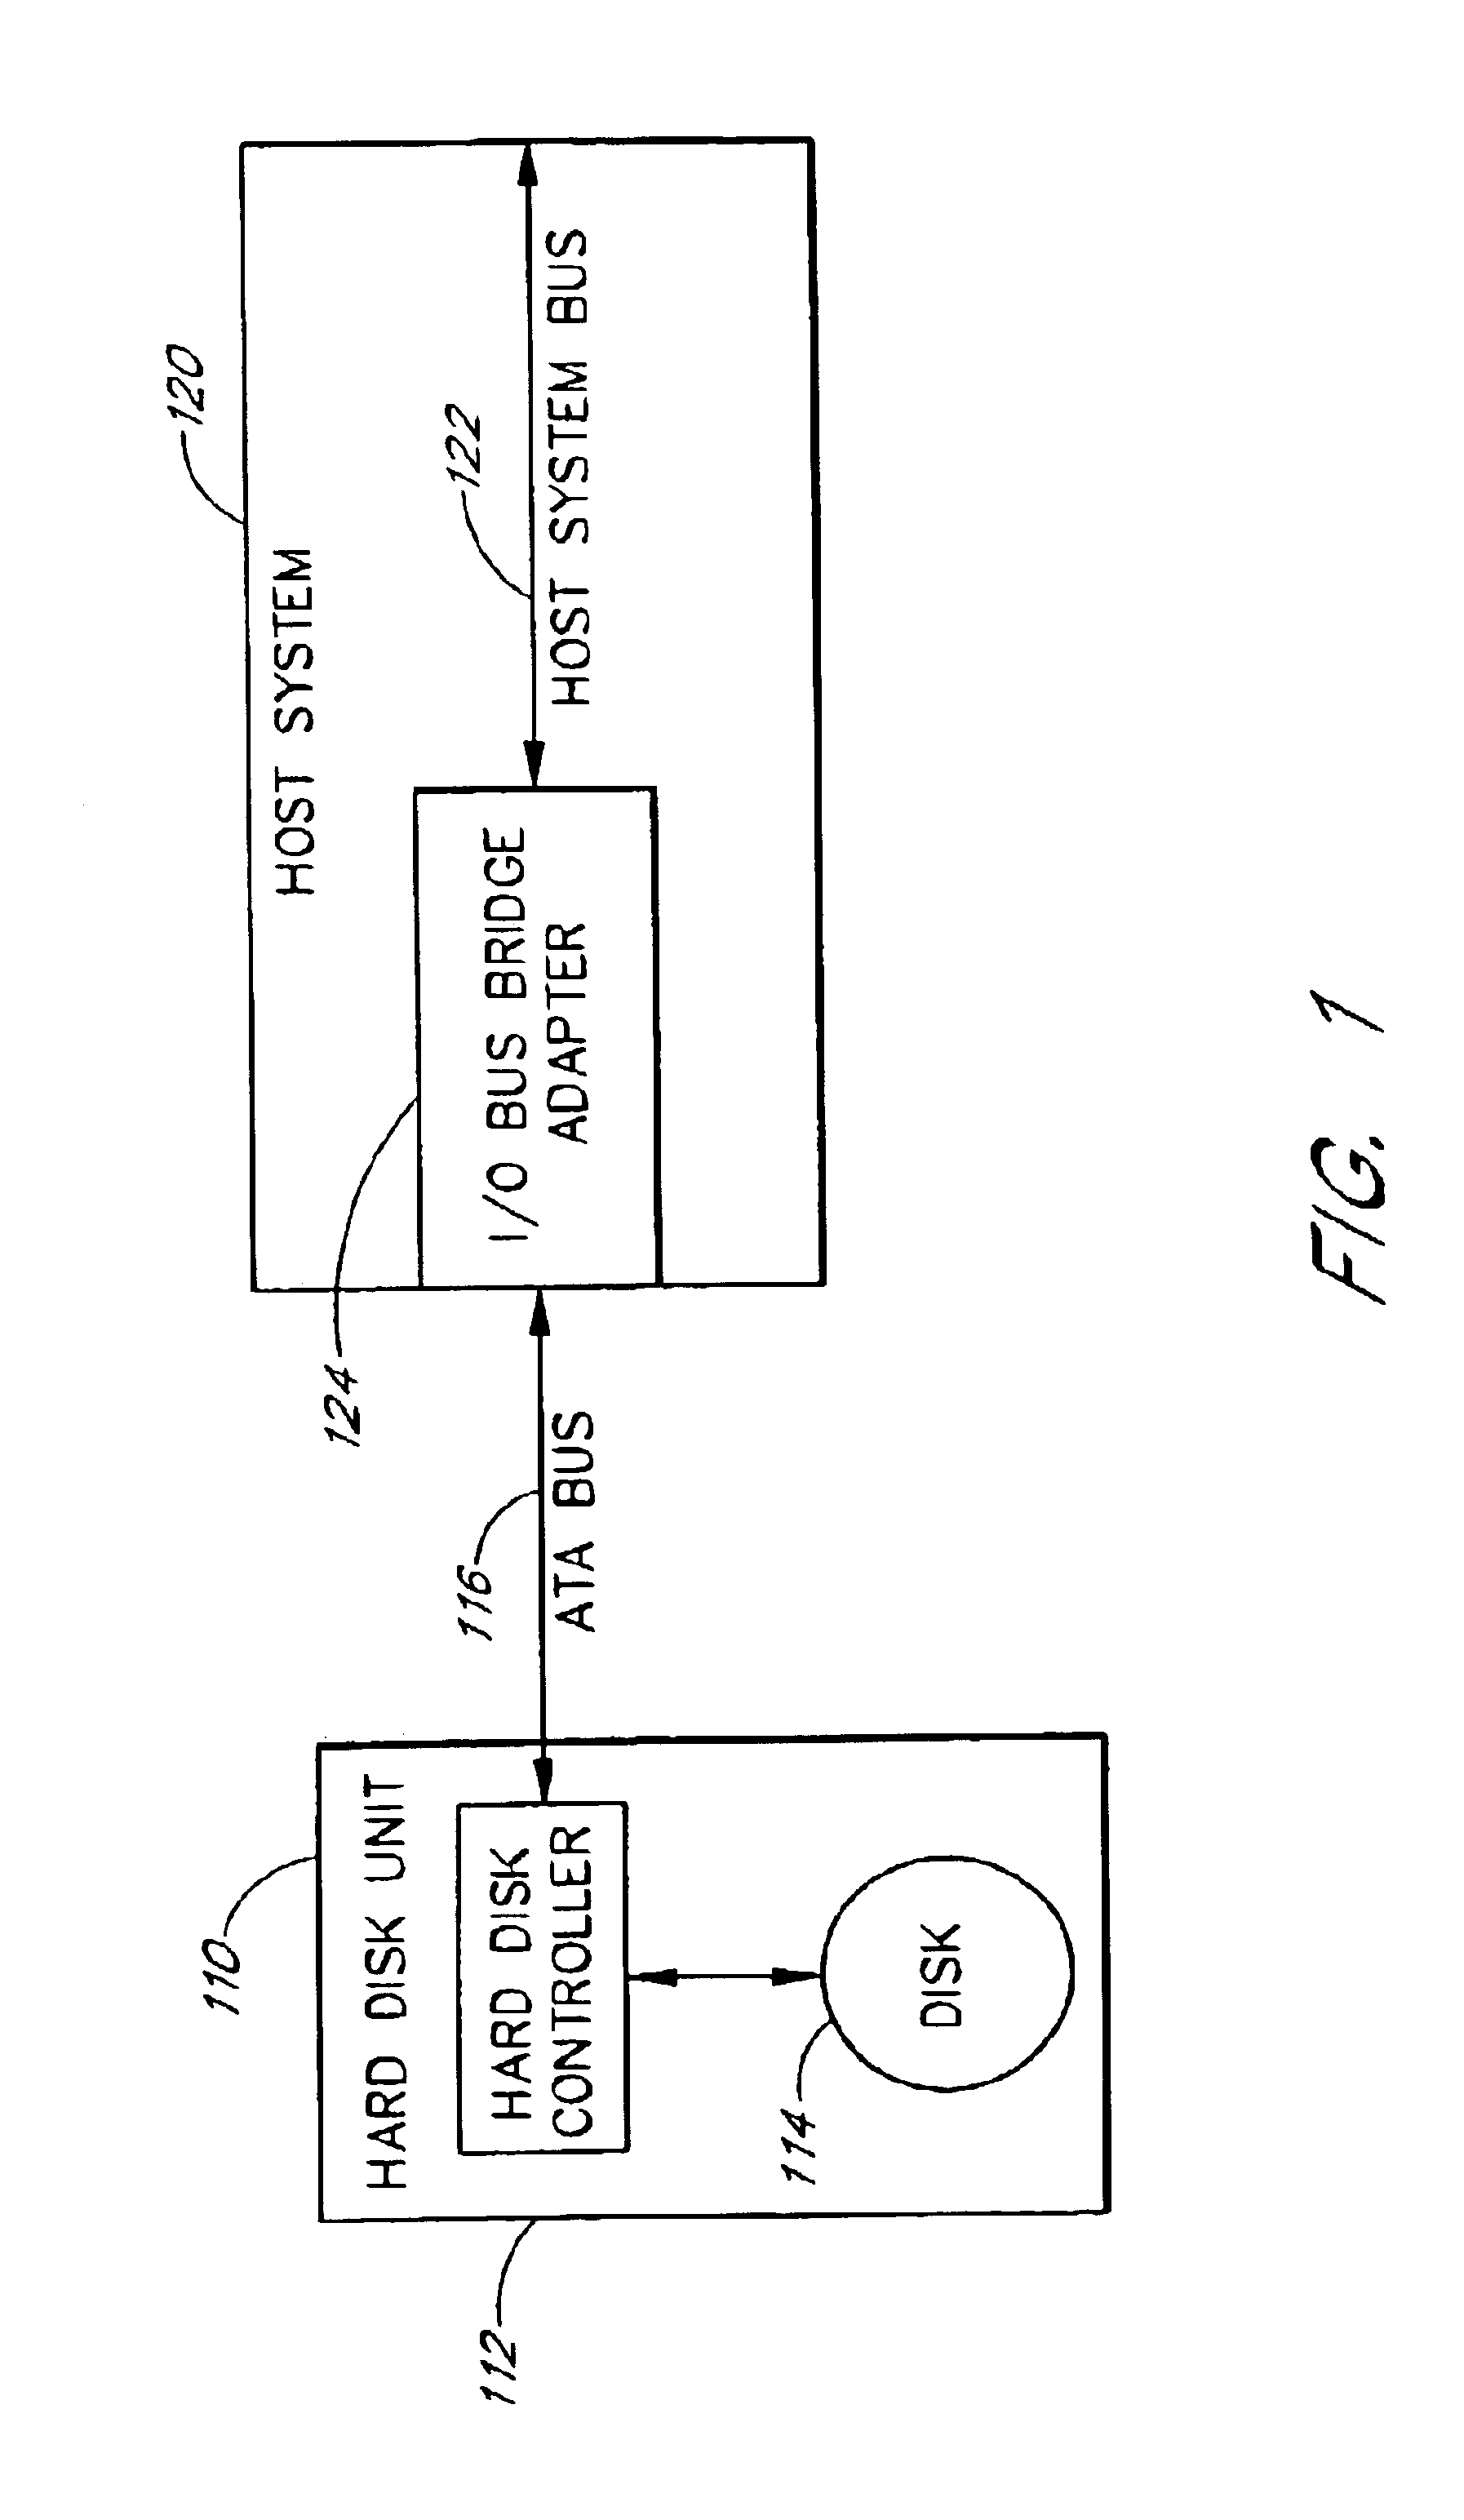 Disk controller configured to perform out of order execution of write operations